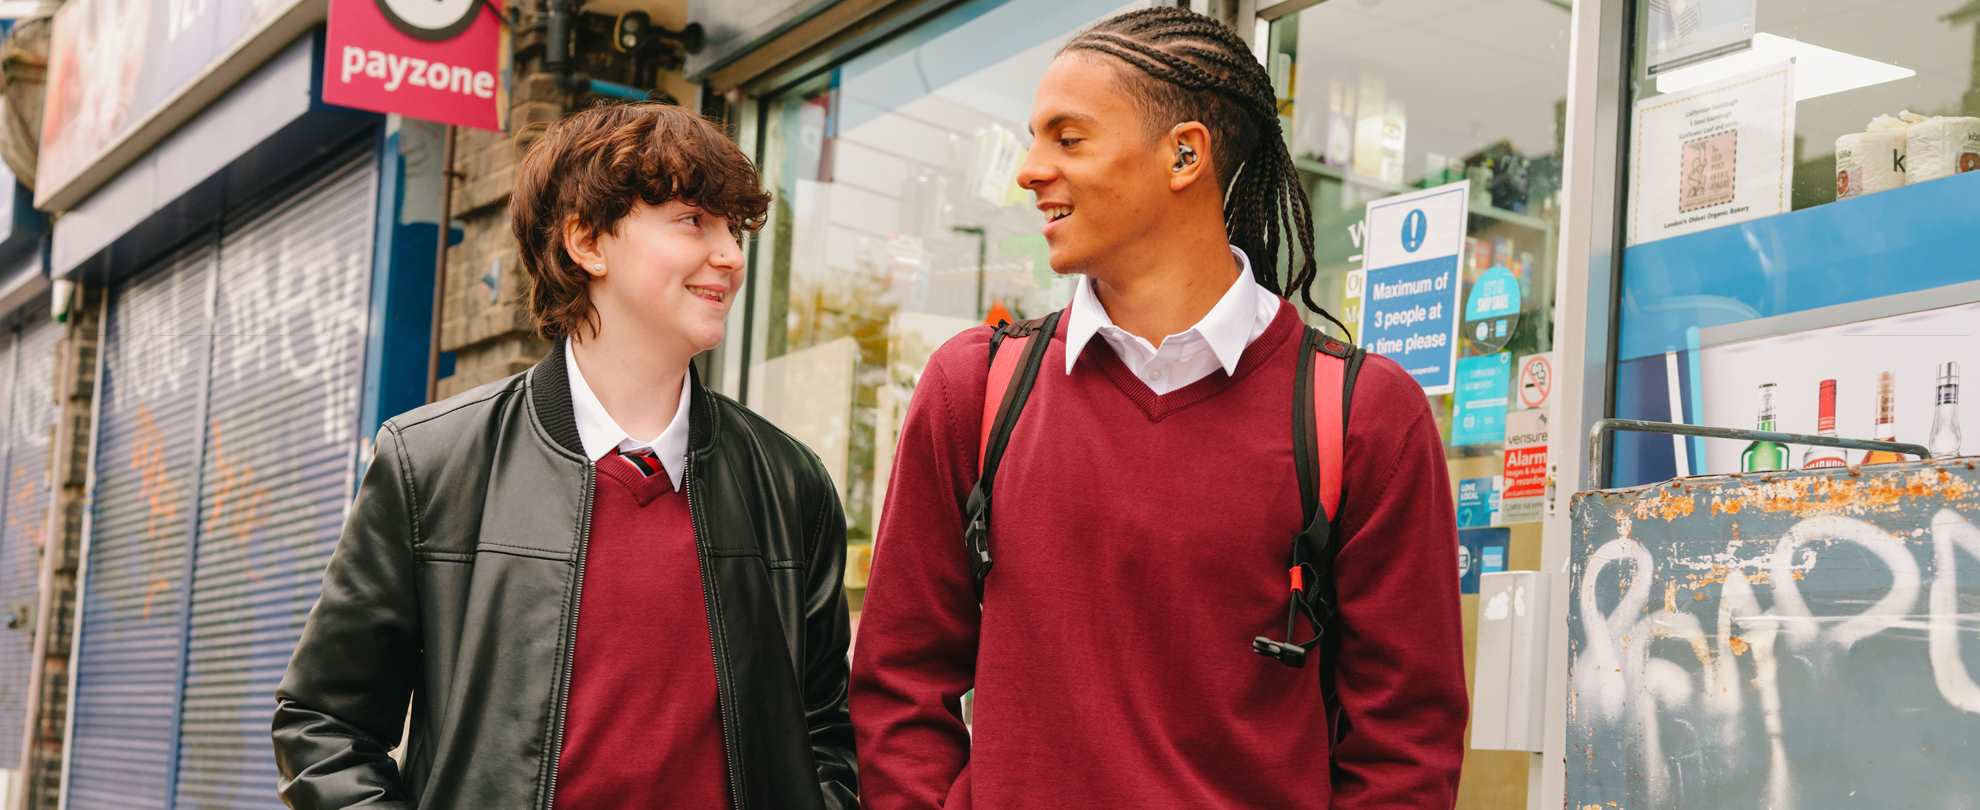 A Black teenage boy wearing a hearing aid speaking to a white non-binary teenager. They are walking on the street outside a shop. Both people are smiling.